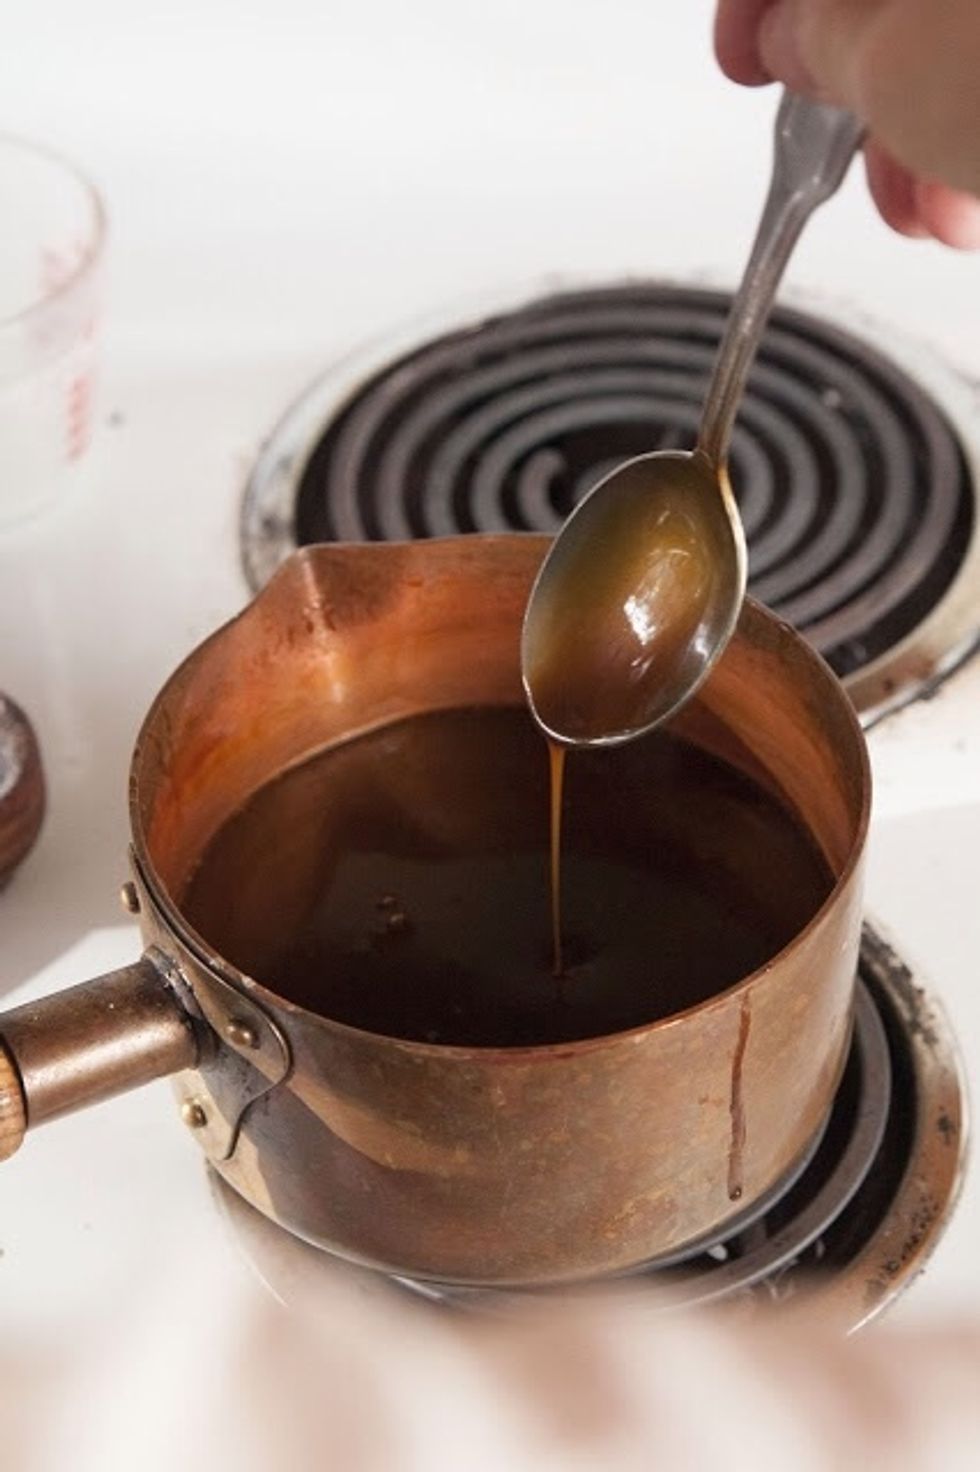 Put the pan back on the stove. Turn down the heat to medium and cook for another few minutes until the caramel turns thick and creamy. Look for it to coat the back of a spoon.